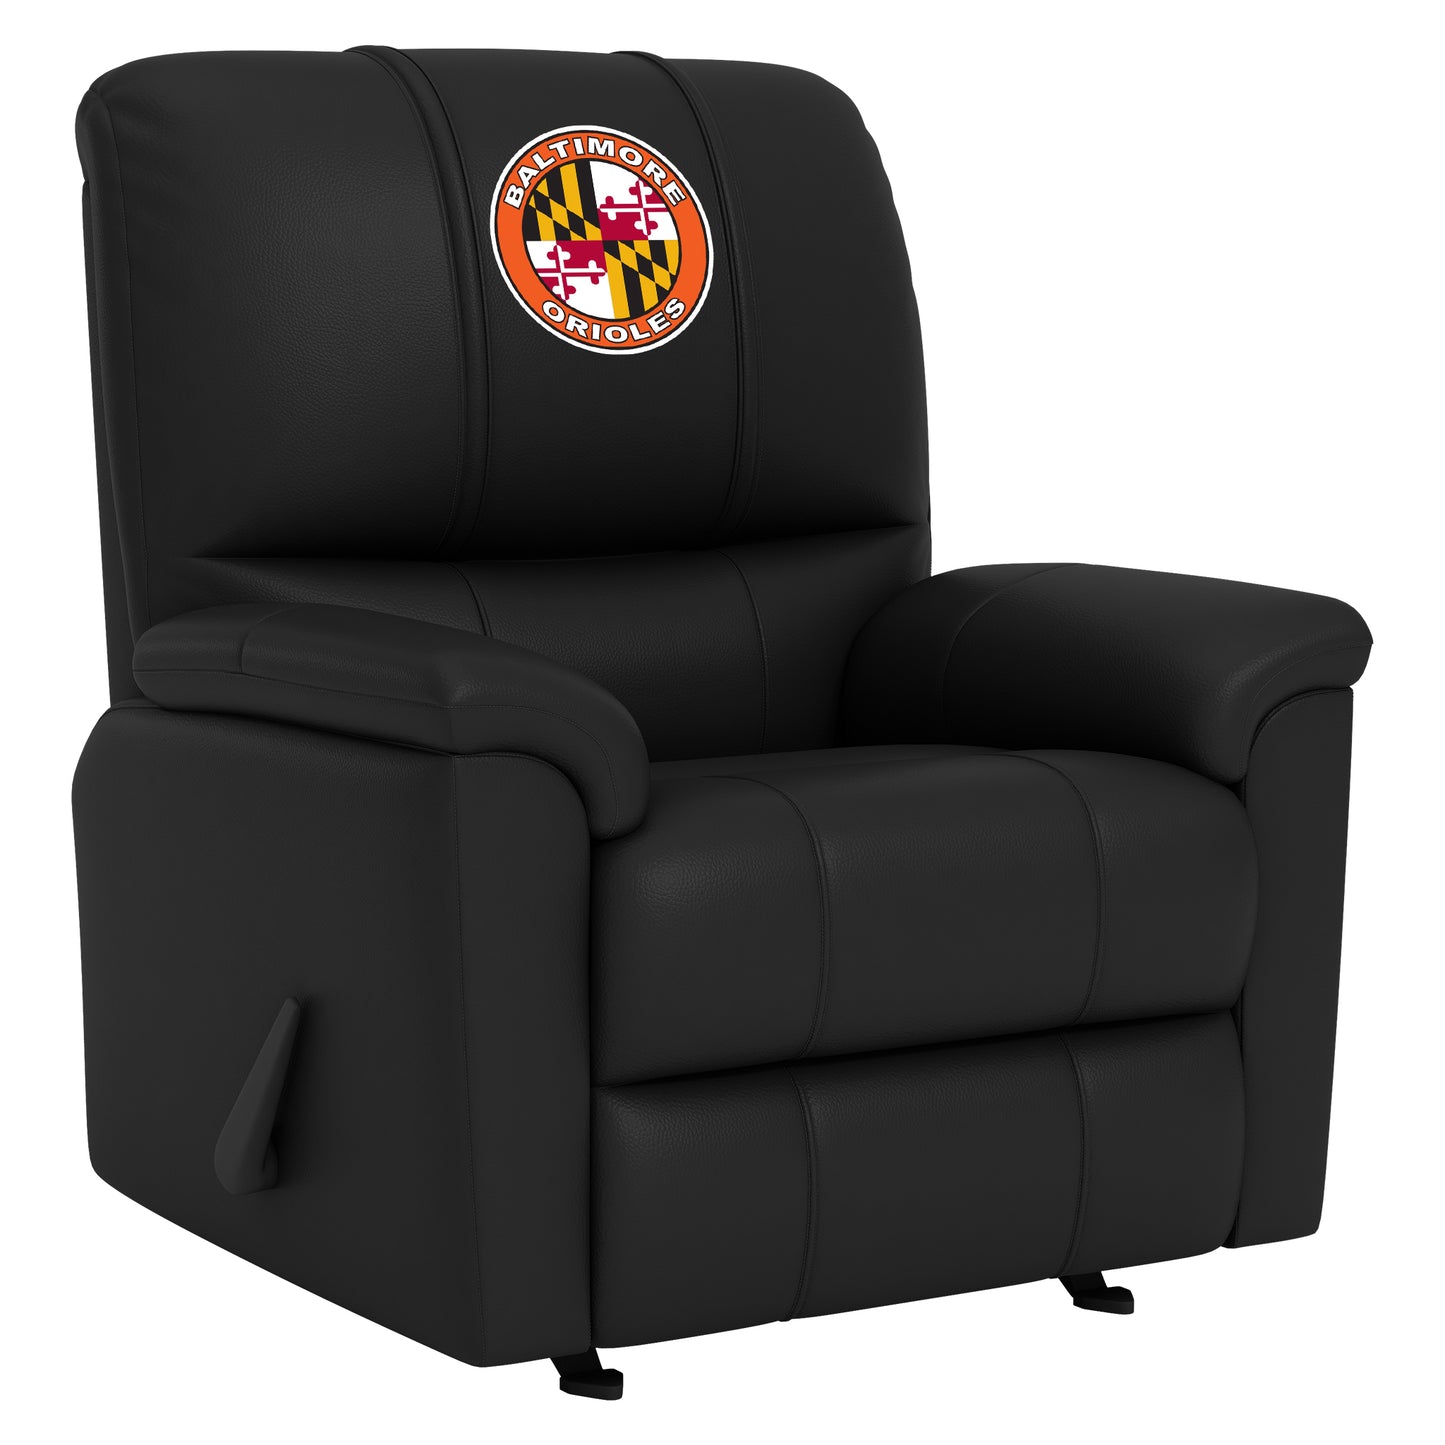 Freedom Rocker Recliner with Baltimore Orioles Cooperstown Primary